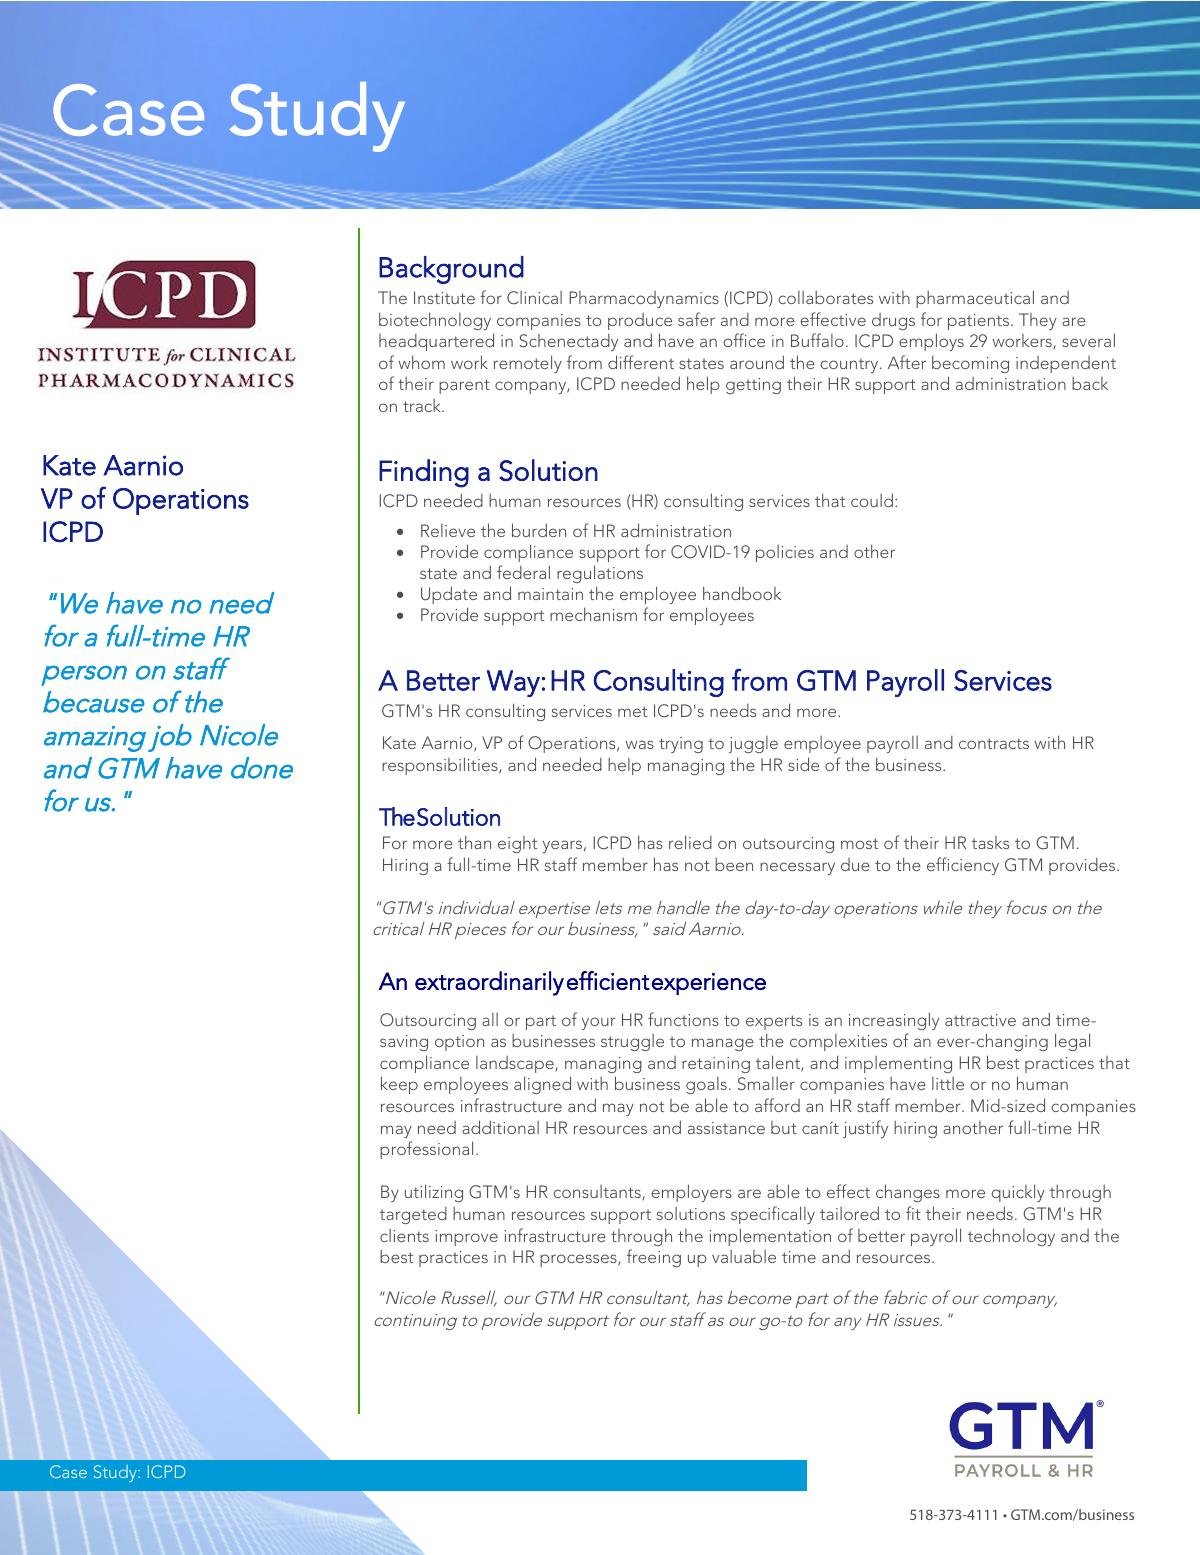 Case Study: HR Consulting Services for Institute for Clinical Pharmacodynamics